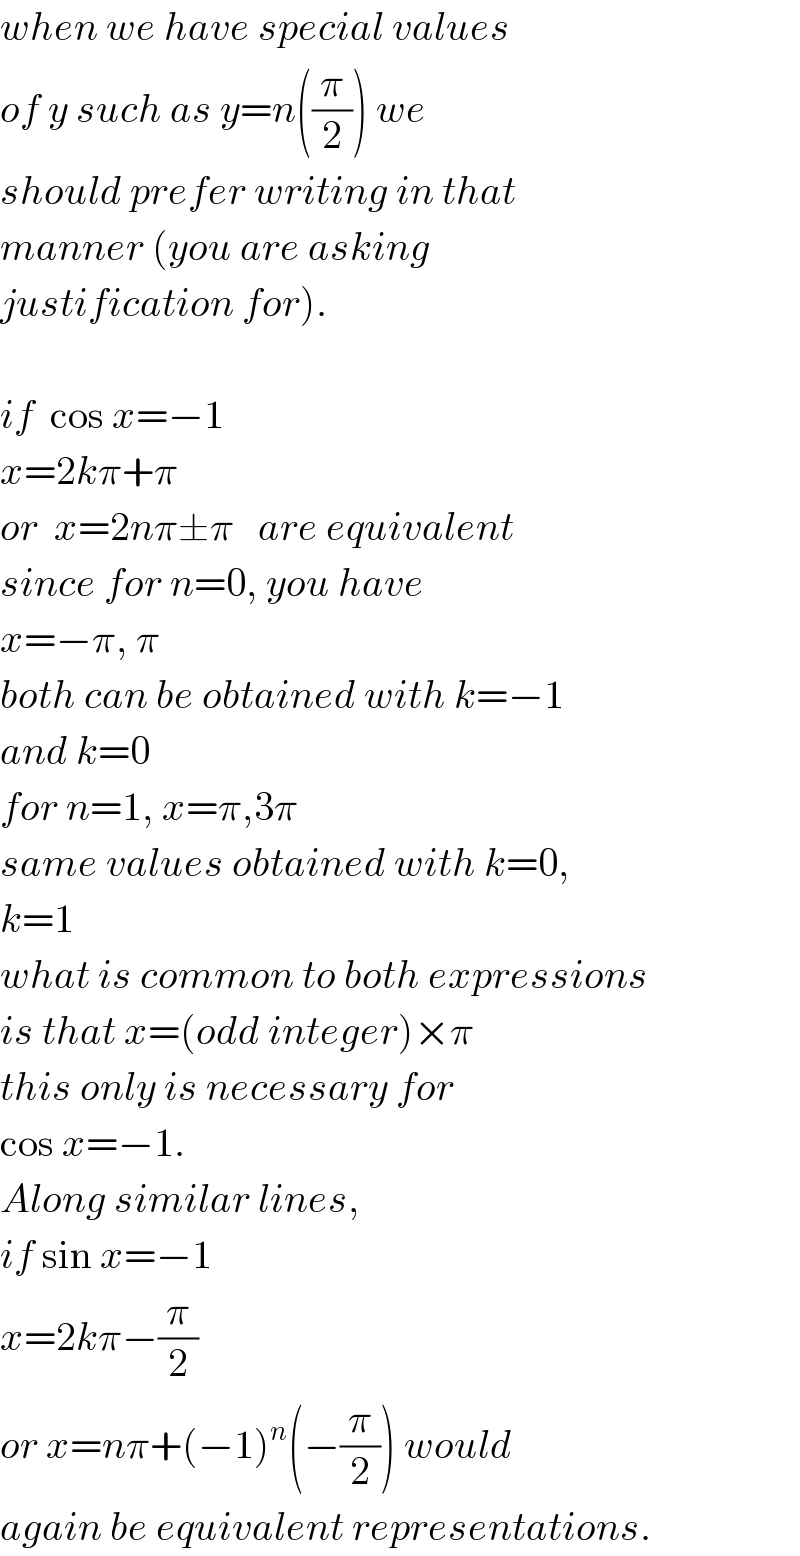 when we have special values   of y such as y=n((π/2)) we   should prefer writing in that  manner (you are asking  justification for).    if  cos x=−1  x=2kπ+π  or  x=2nπ±π   are equivalent  since for n=0, you have   x=−π, π  both can be obtained with k=−1  and k=0  for n=1, x=π,3π  same values obtained with k=0,  k=1  what is common to both expressions  is that x=(odd integer)×π  this only is necessary for  cos x=−1.  Along similar lines,  if sin x=−1  x=2kπ−(π/2)  or x=nπ+(−1)^n (−(π/2)) would   again be equivalent representations.  